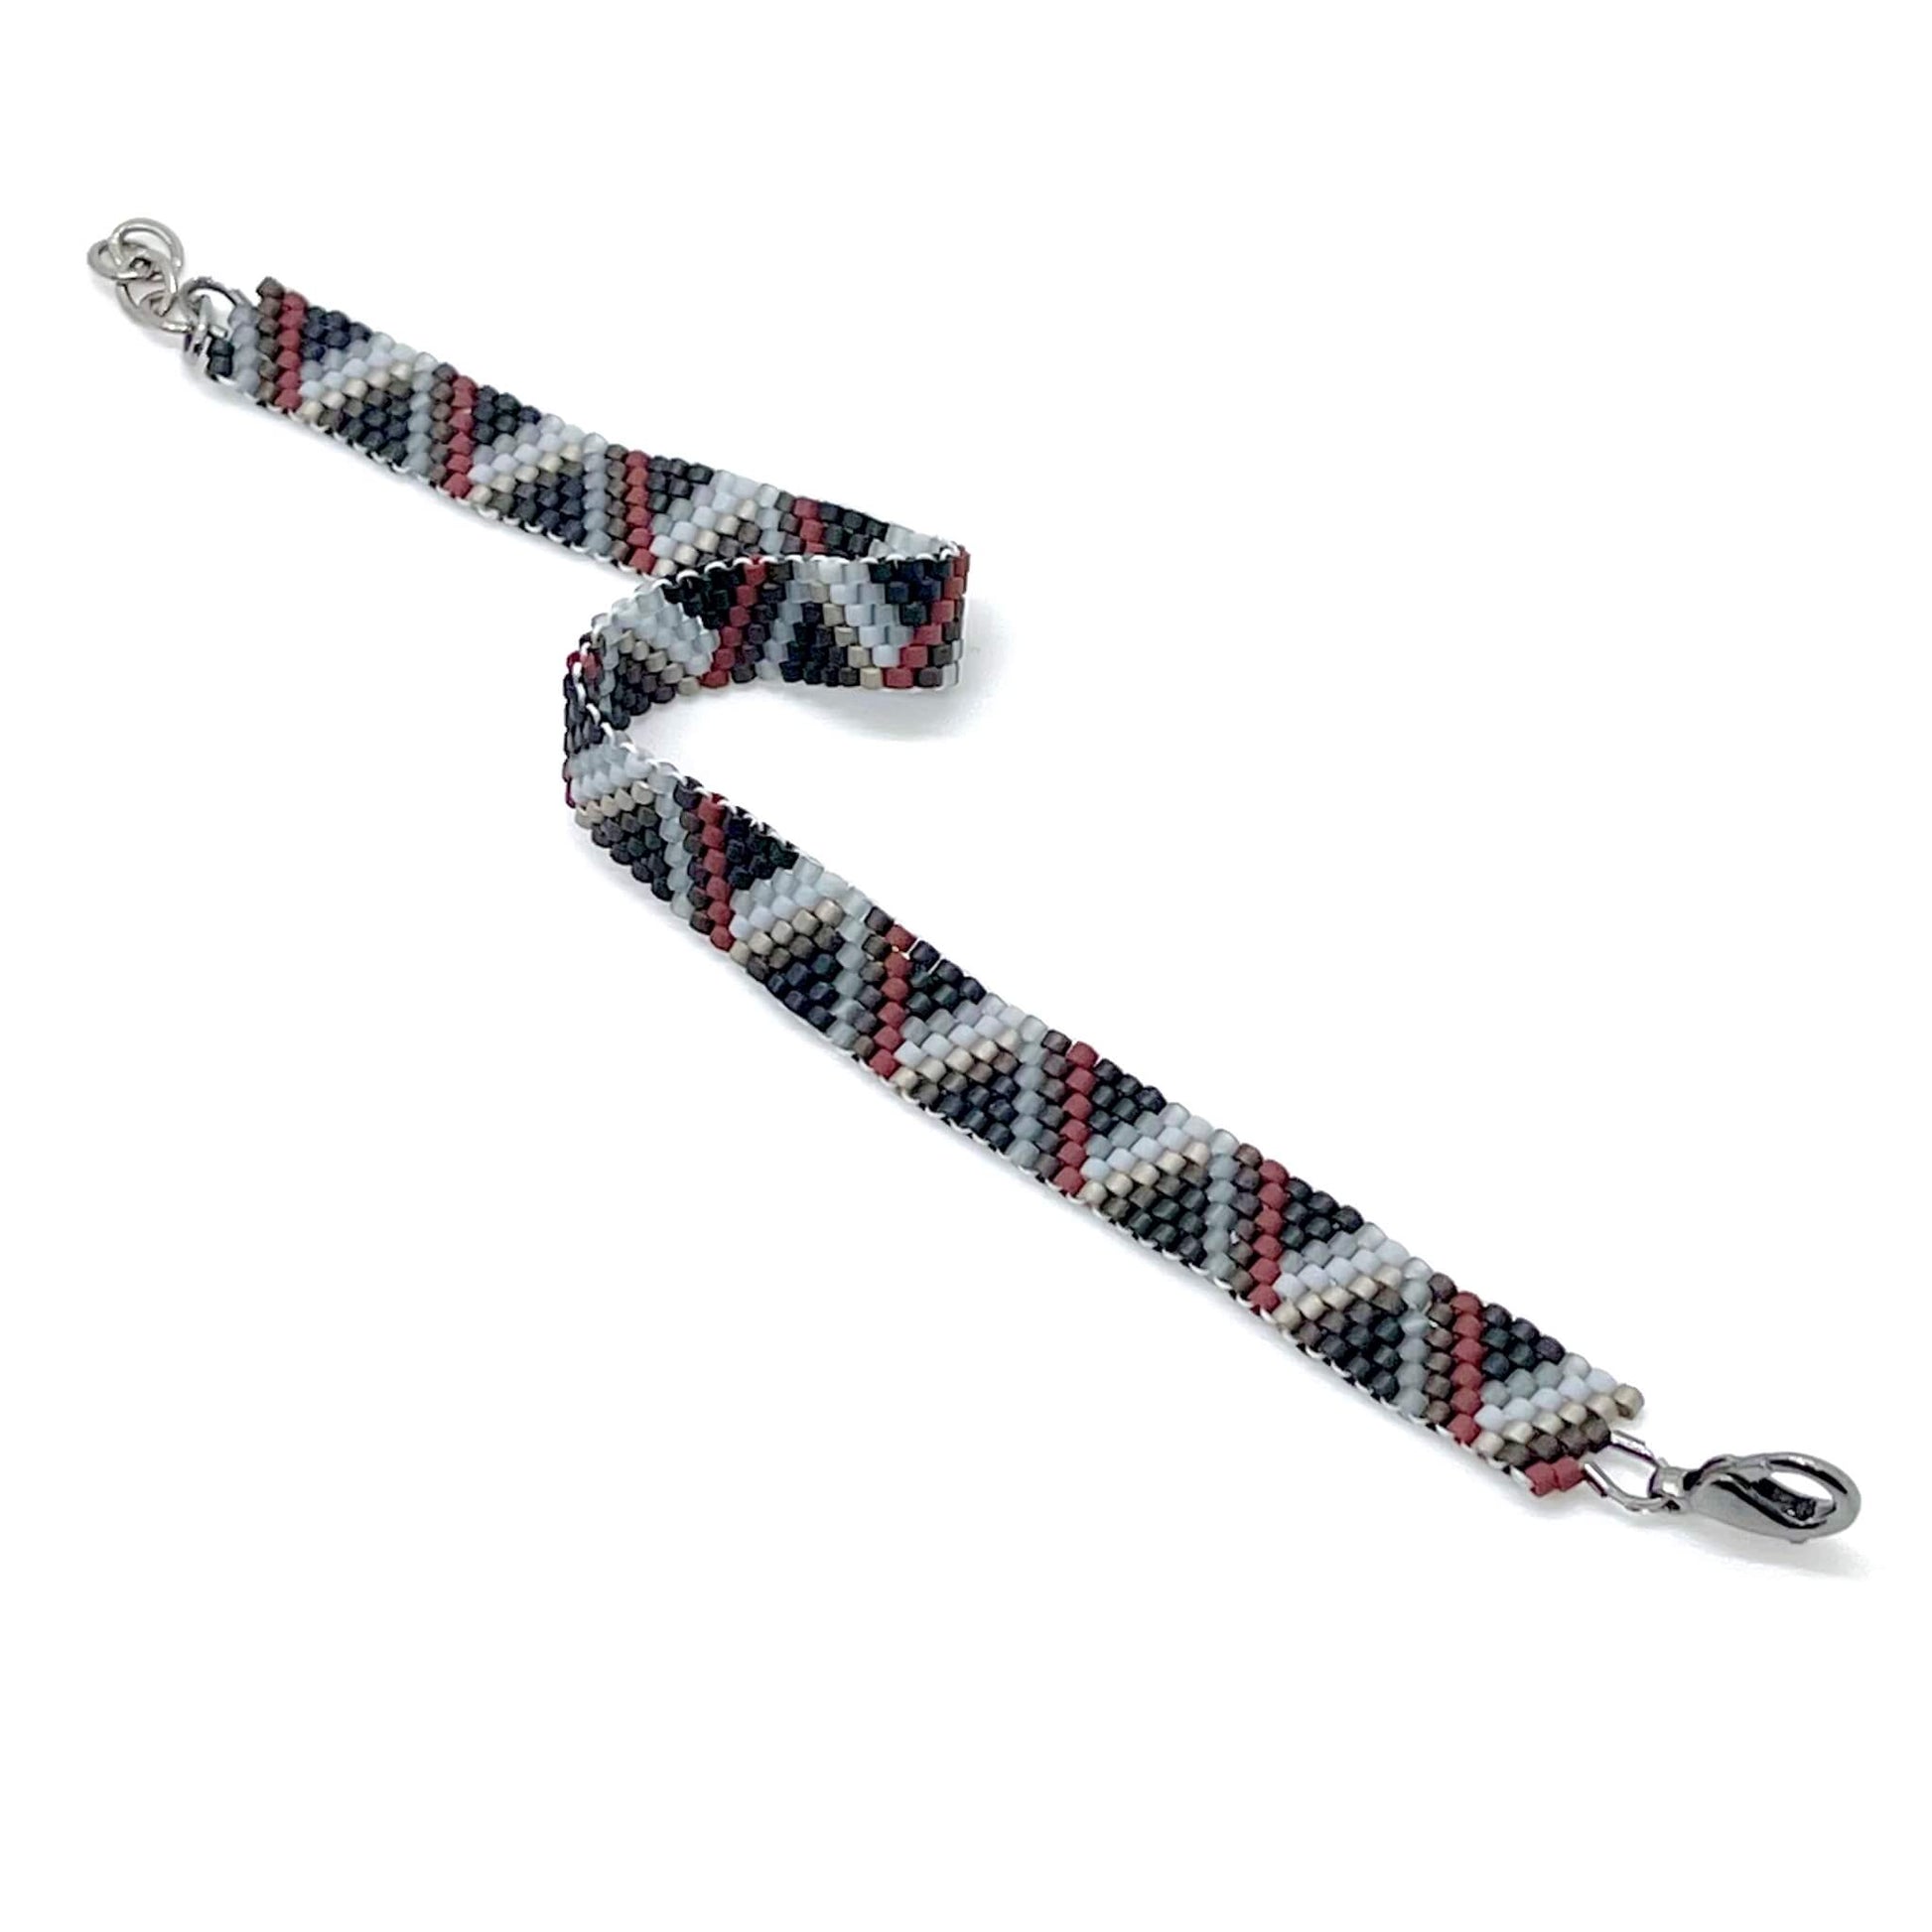 Hand woven men’s boho beaded peyote bracelet with clasp & black, white, gray, & dark red beads in striped triangles.